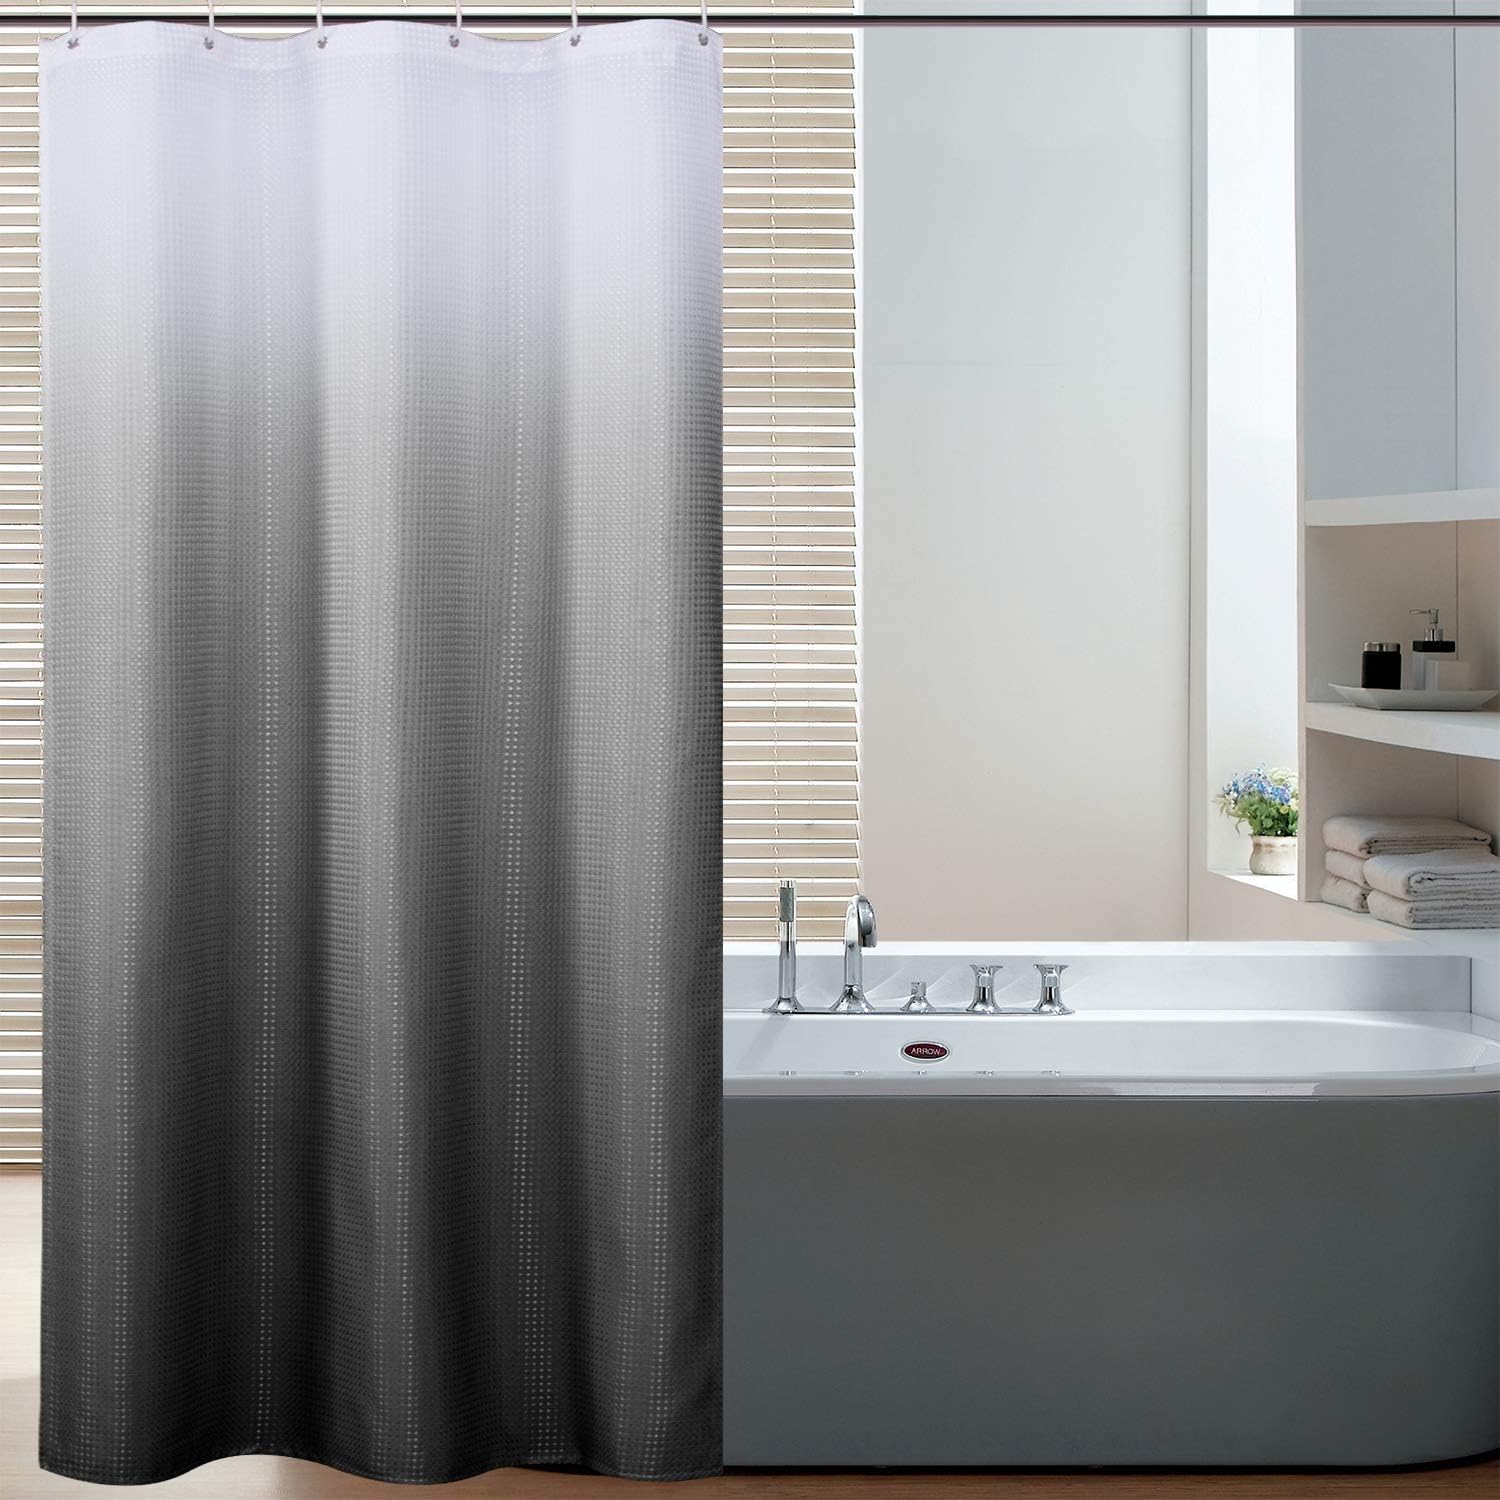 Bermino Textured Fabric Bath Shower, Bathtub And Shower Liners Are Made Of What Material